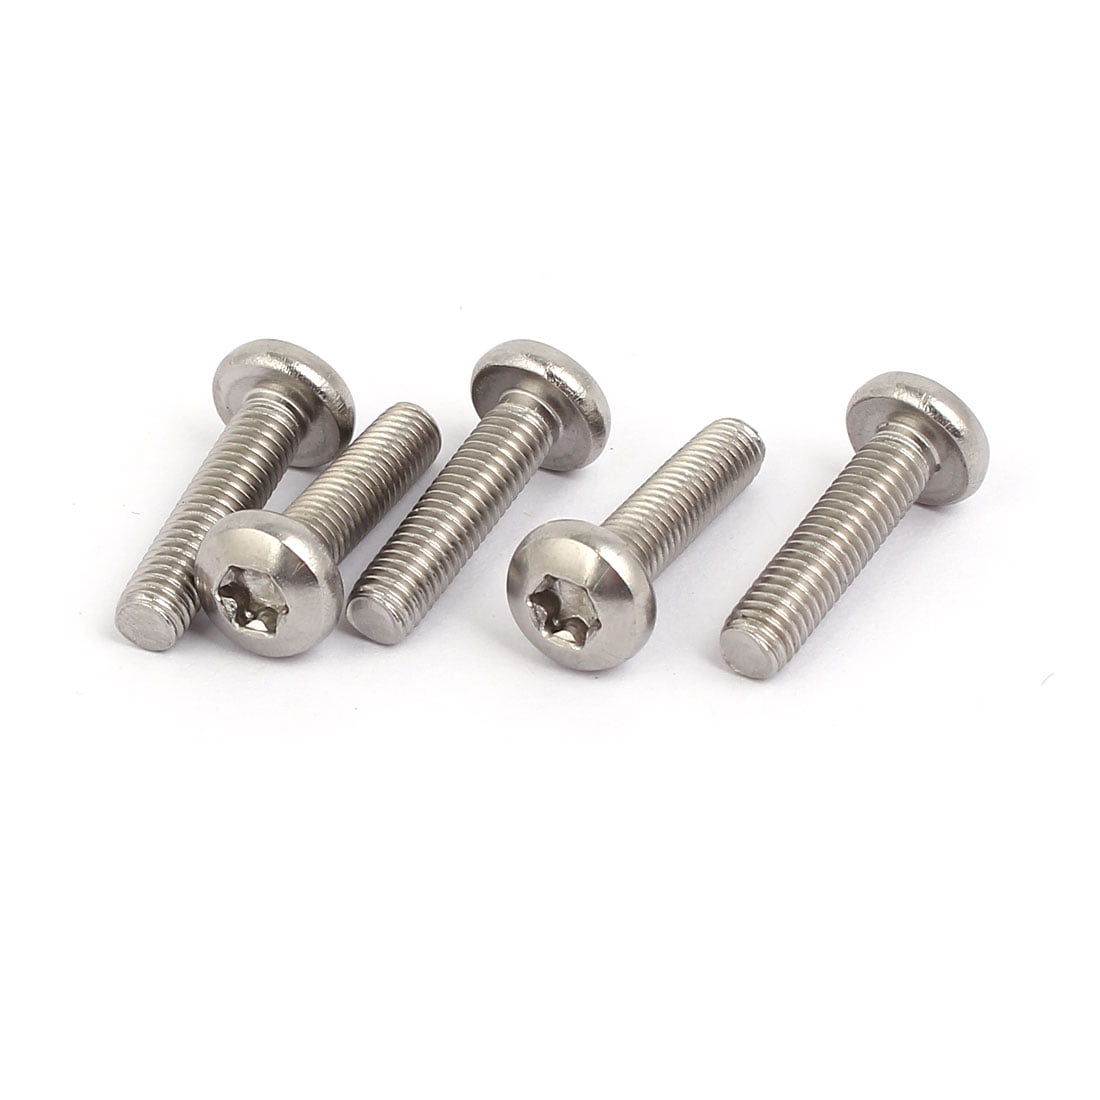 Qty 10 Button Post Torx M5 x 10mm Stainless T25 Security Screw Tamperproof 304 